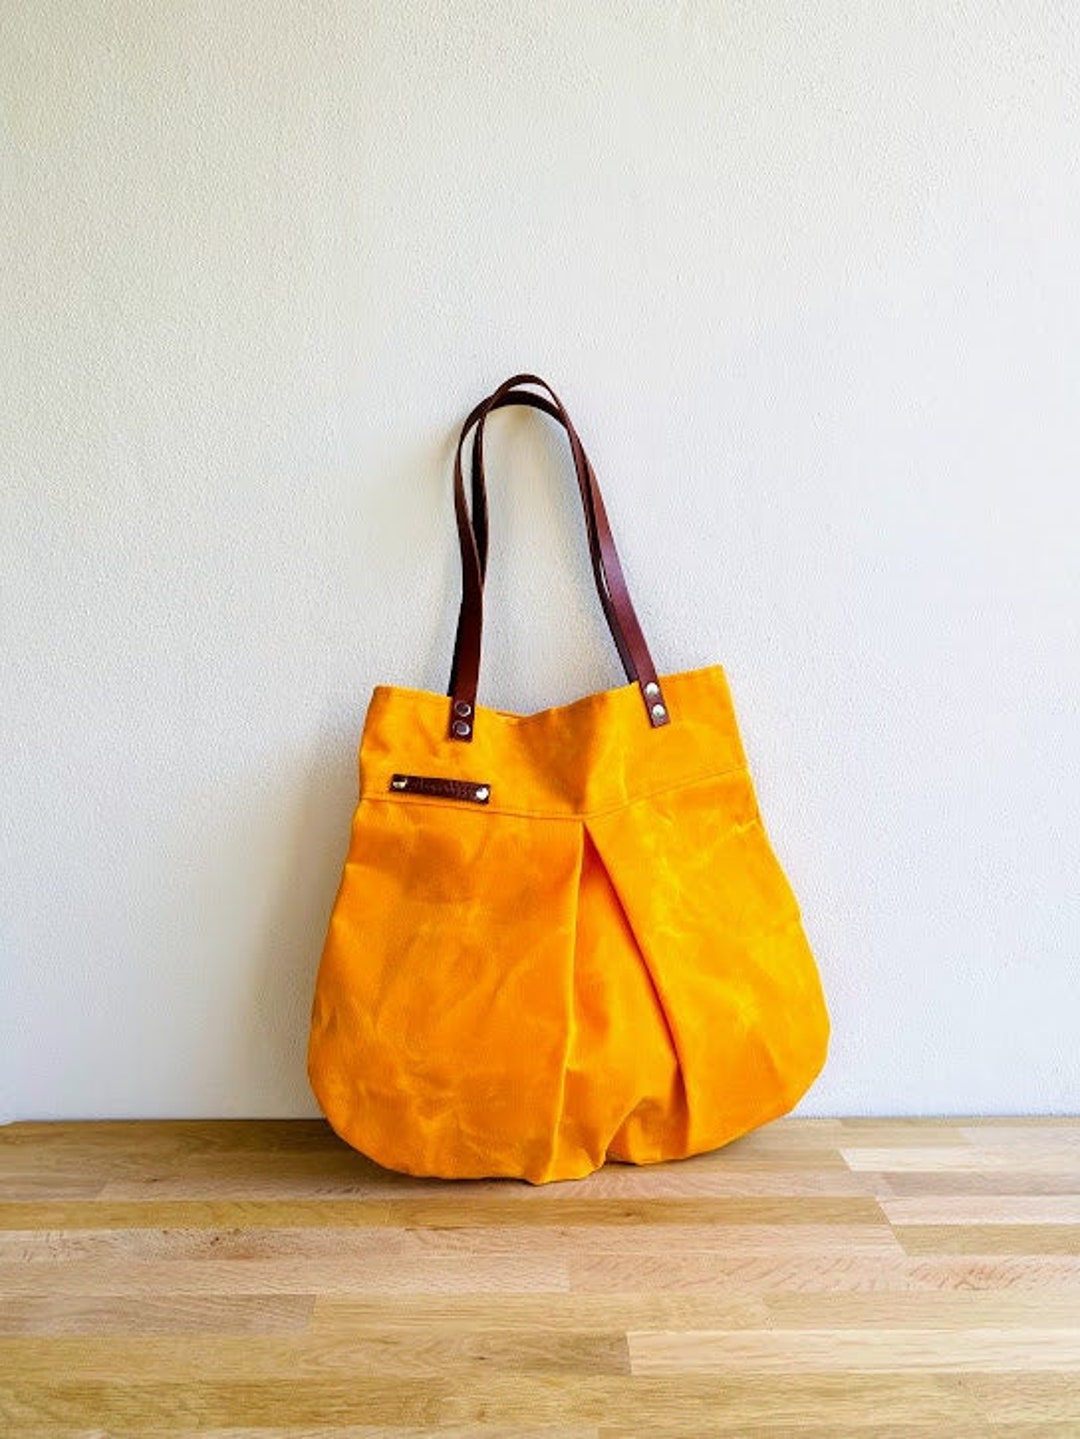 KREMNA Waxed Canvas Shoulder Bag in Bright Yellow Everyday Purse - Etsy